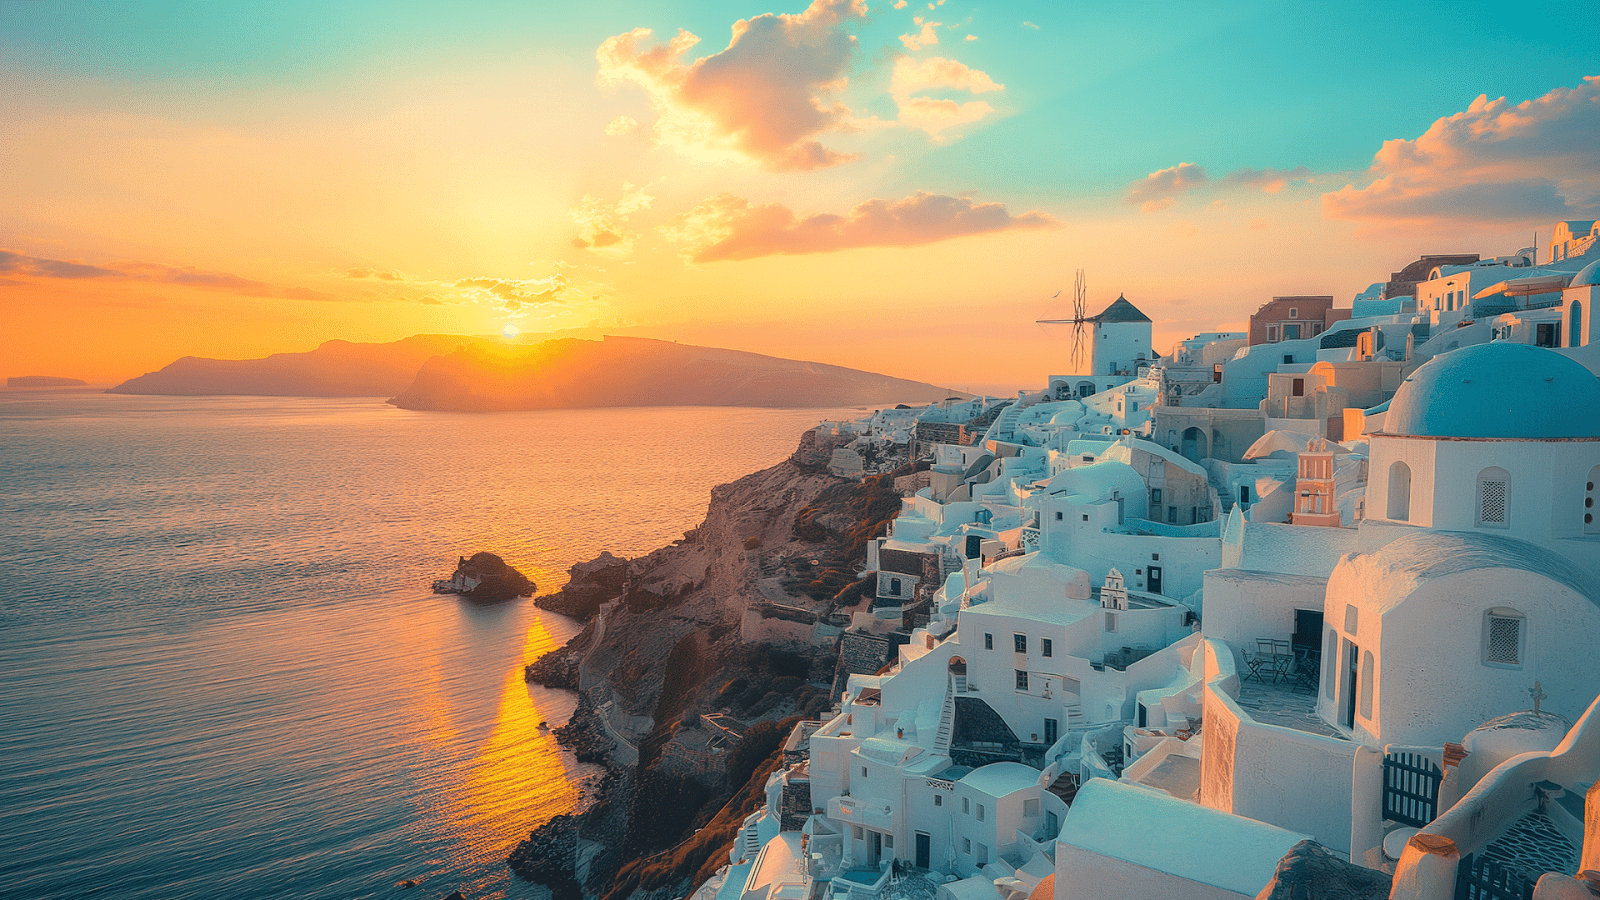 Sunset over Santorini, iconic destination on where to travel in Europe list for island beauty